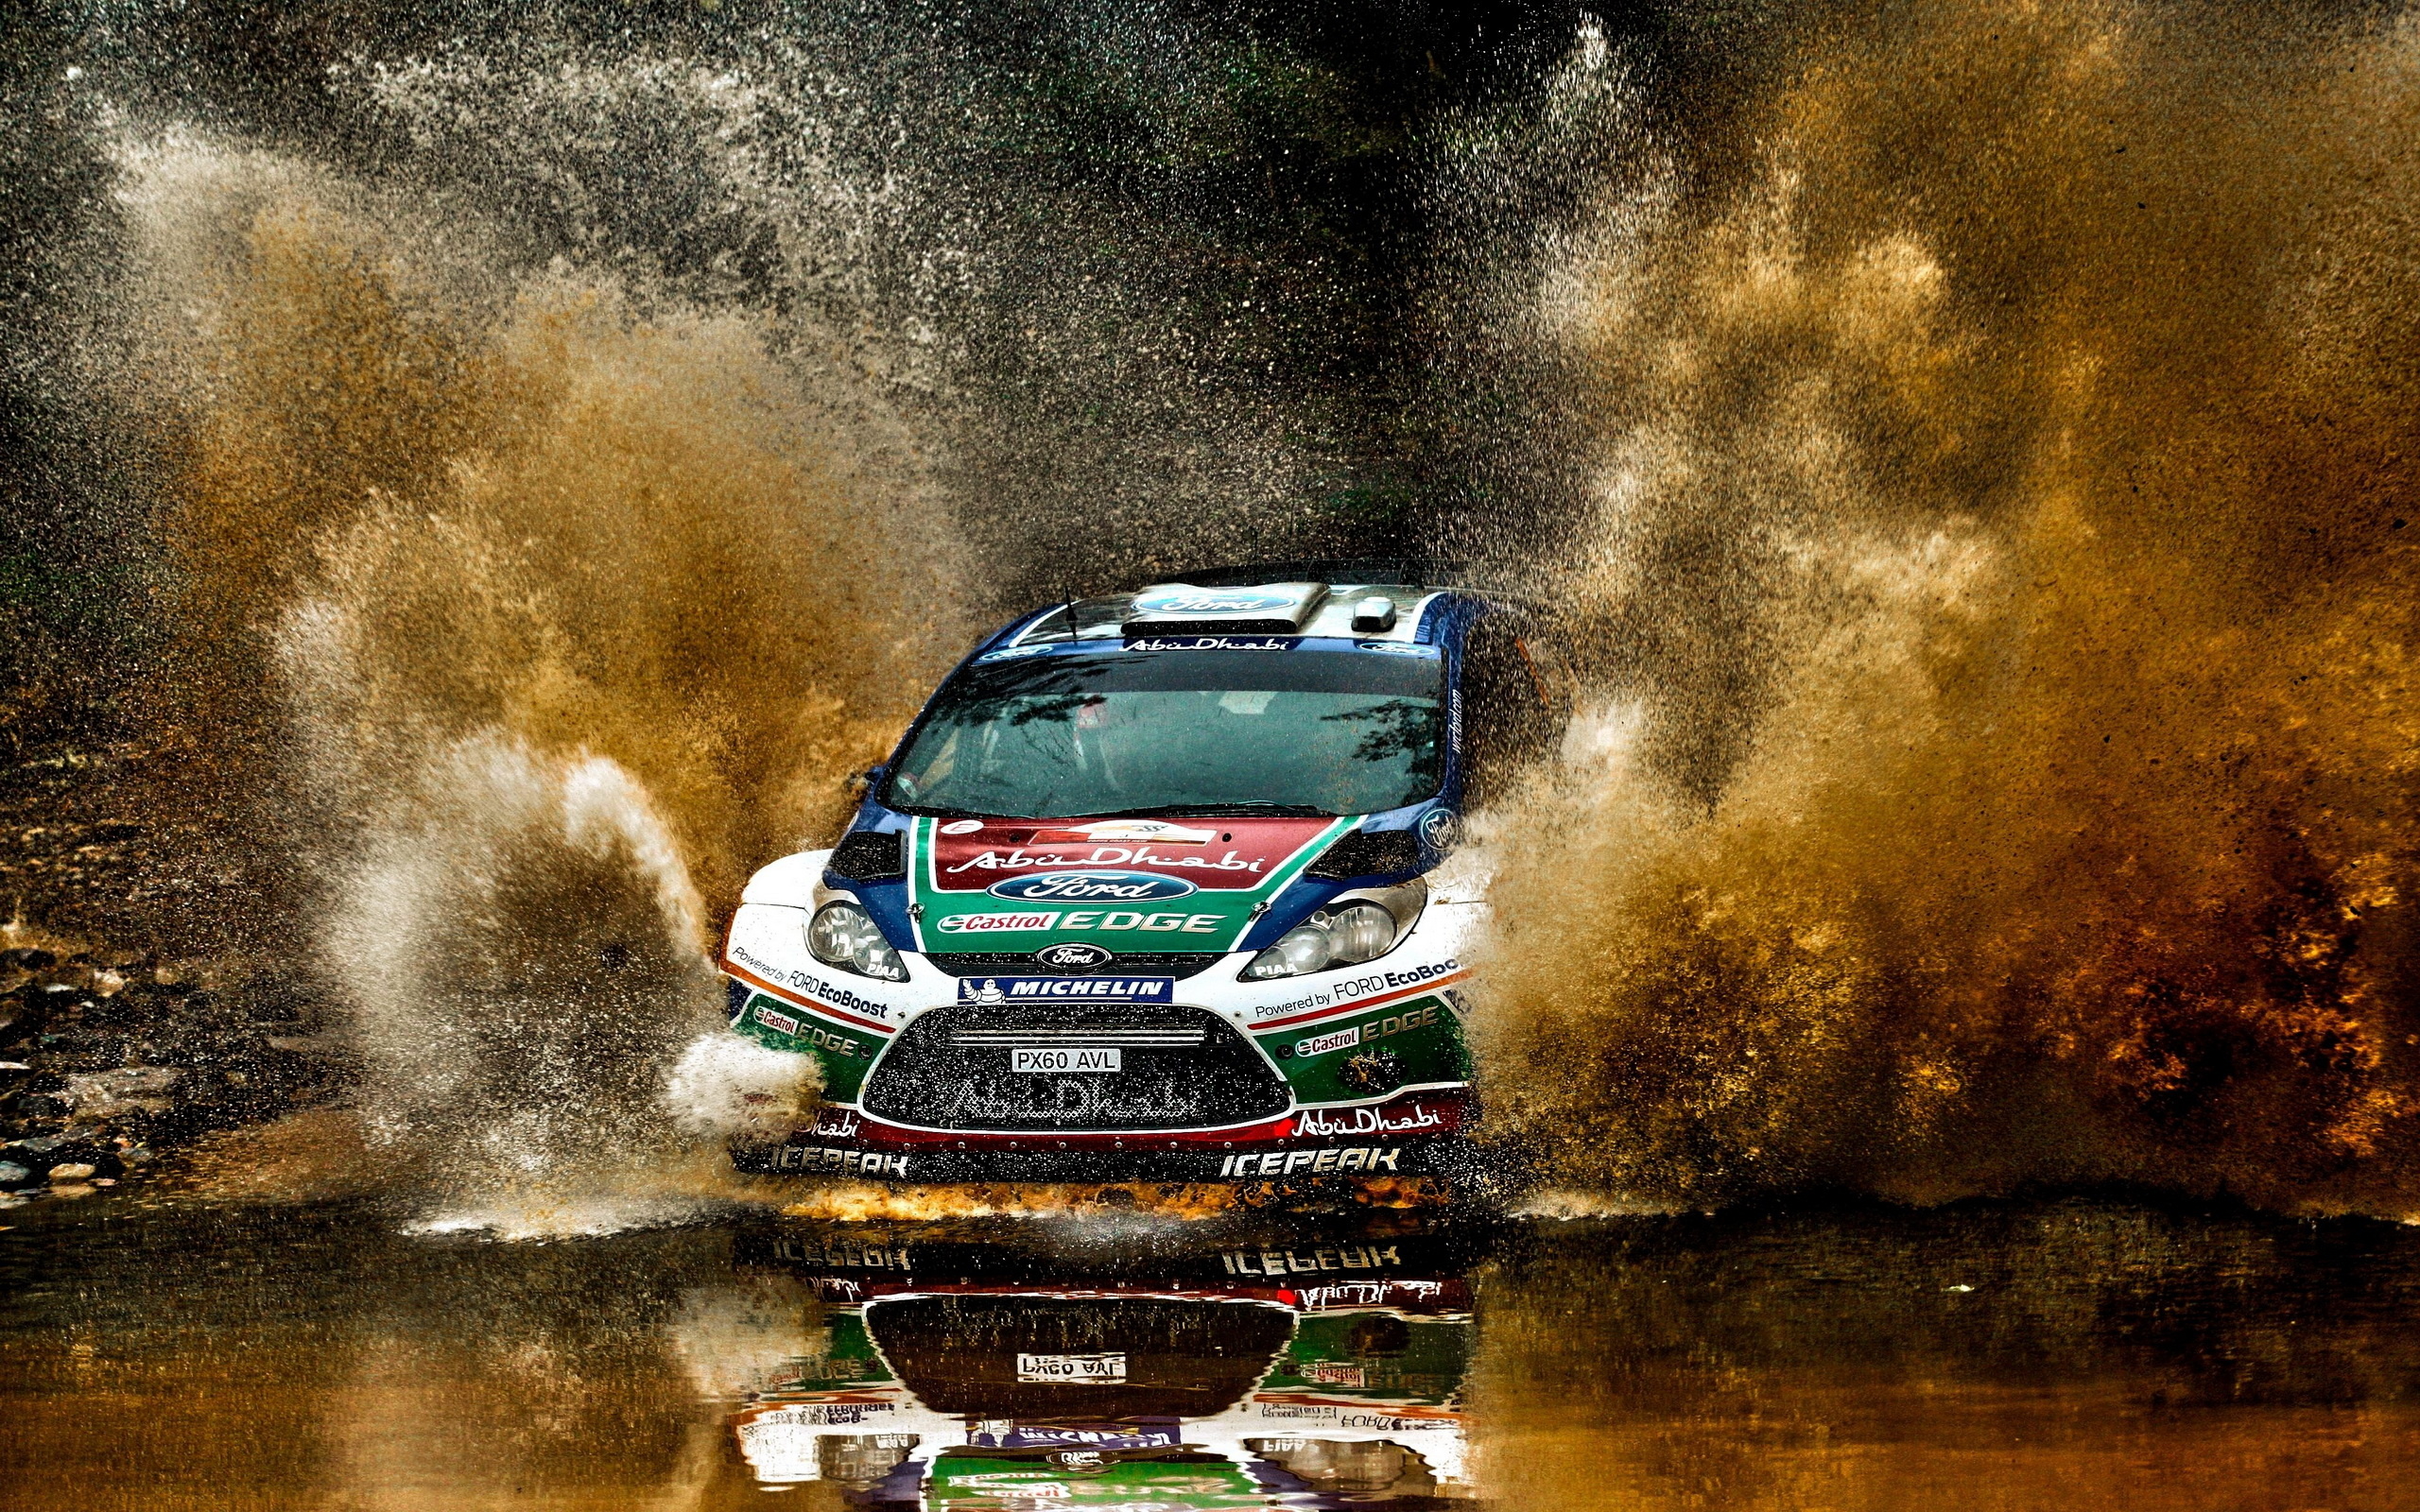 Rally Raid: Ford, Michelin, The Abu Dhabi Grand Prix, Reinforced Tires Splashes Out the Water. 2560x1600 HD Wallpaper.